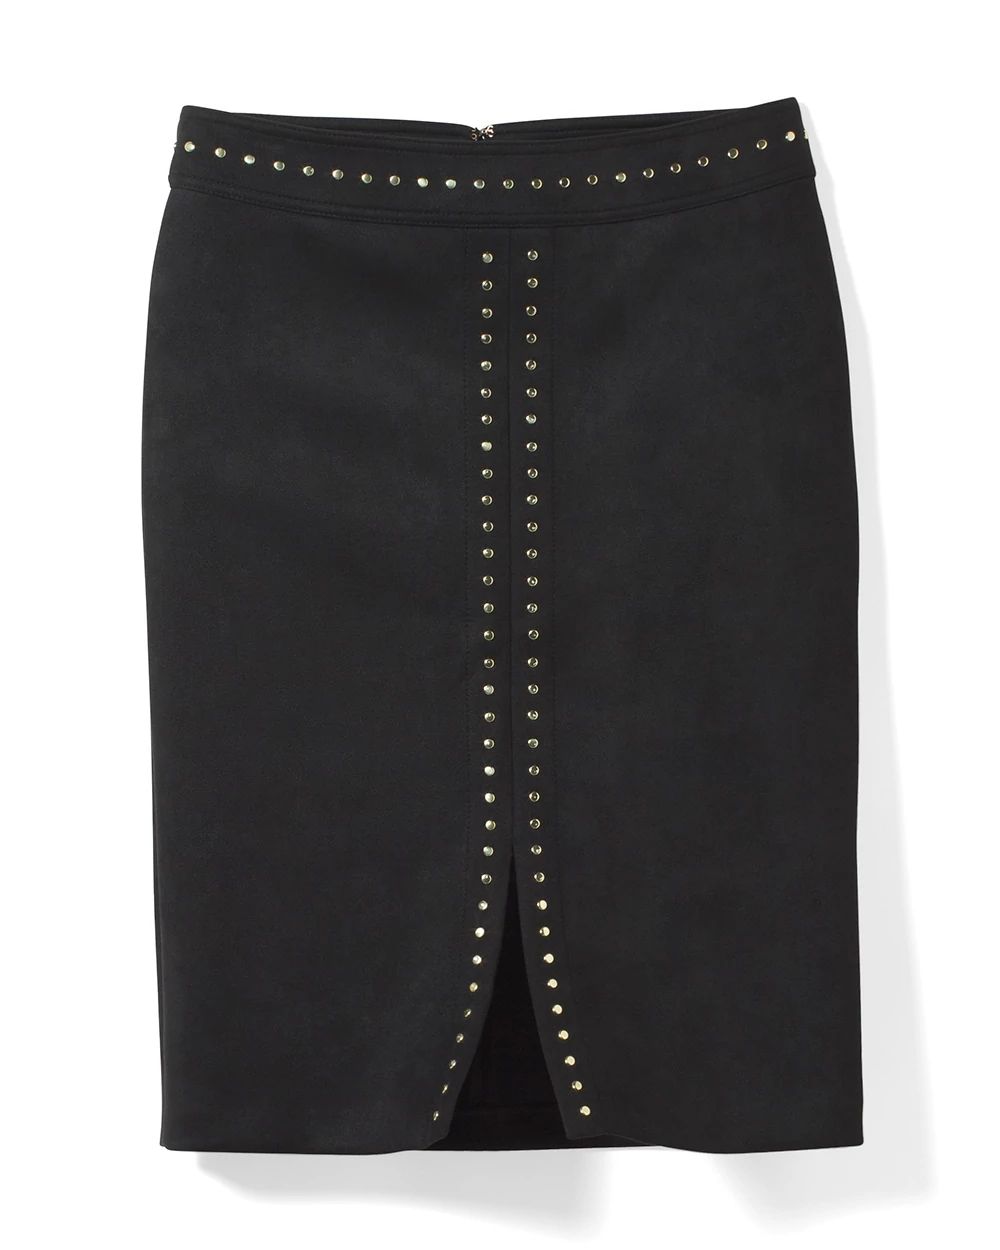 Faux Vegan Studded Pencil Skirt click to view larger image.